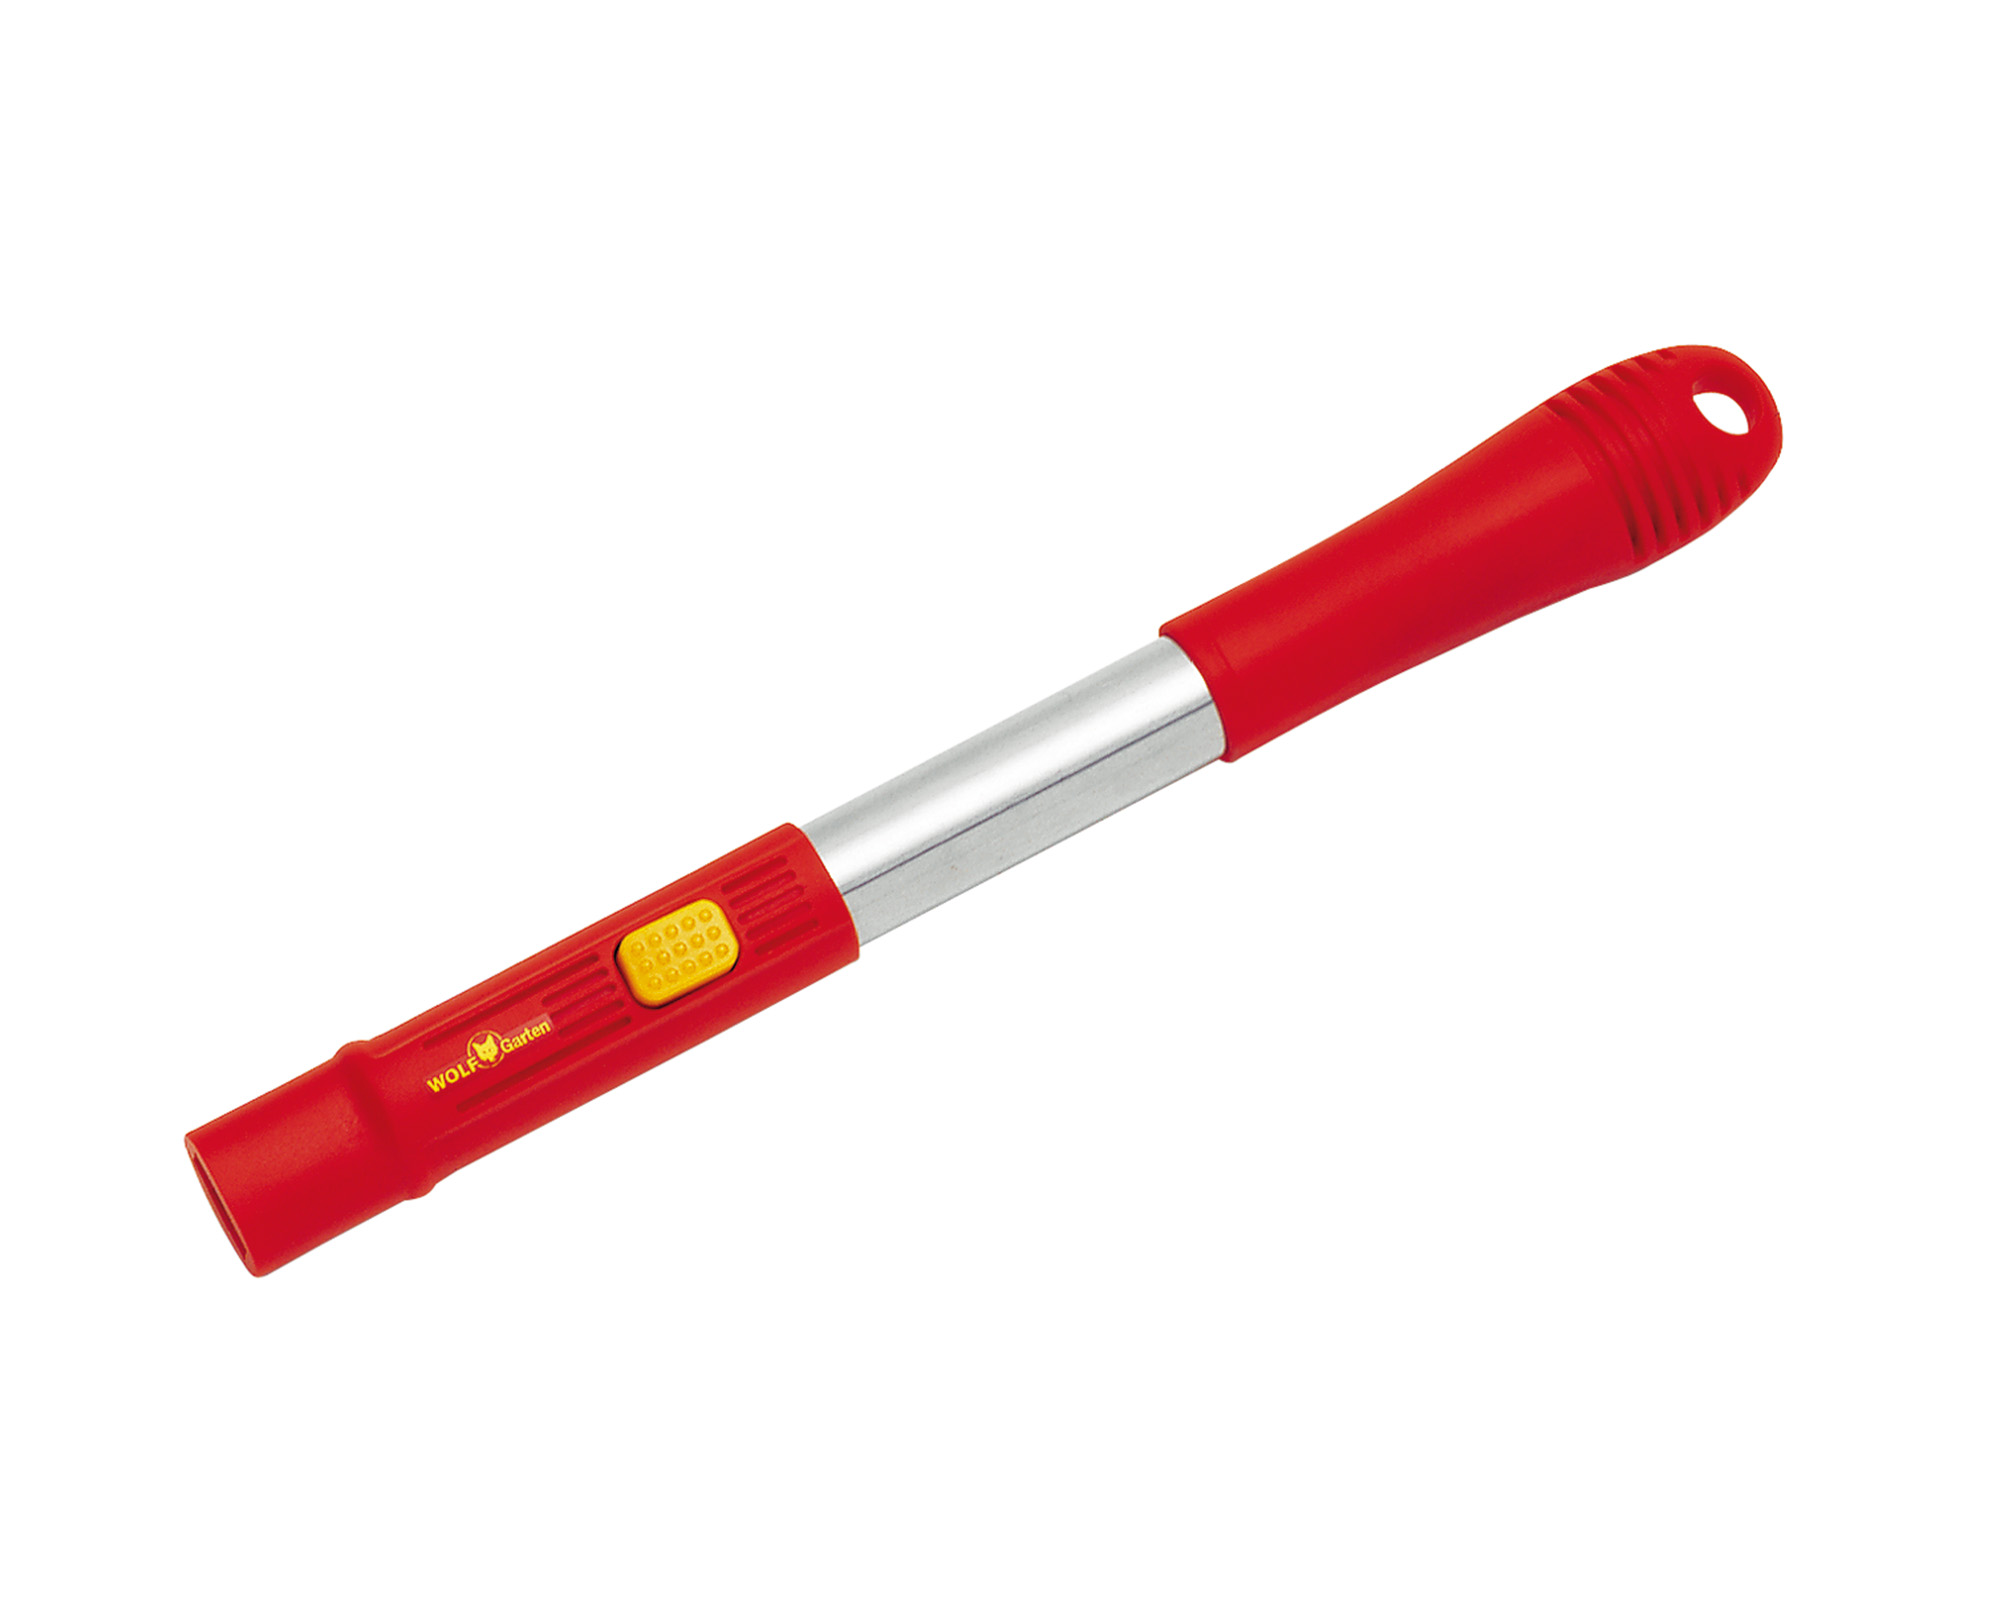 ZM04 Light weight aluminium handle for use with the Wolf Multi-change Tool Range